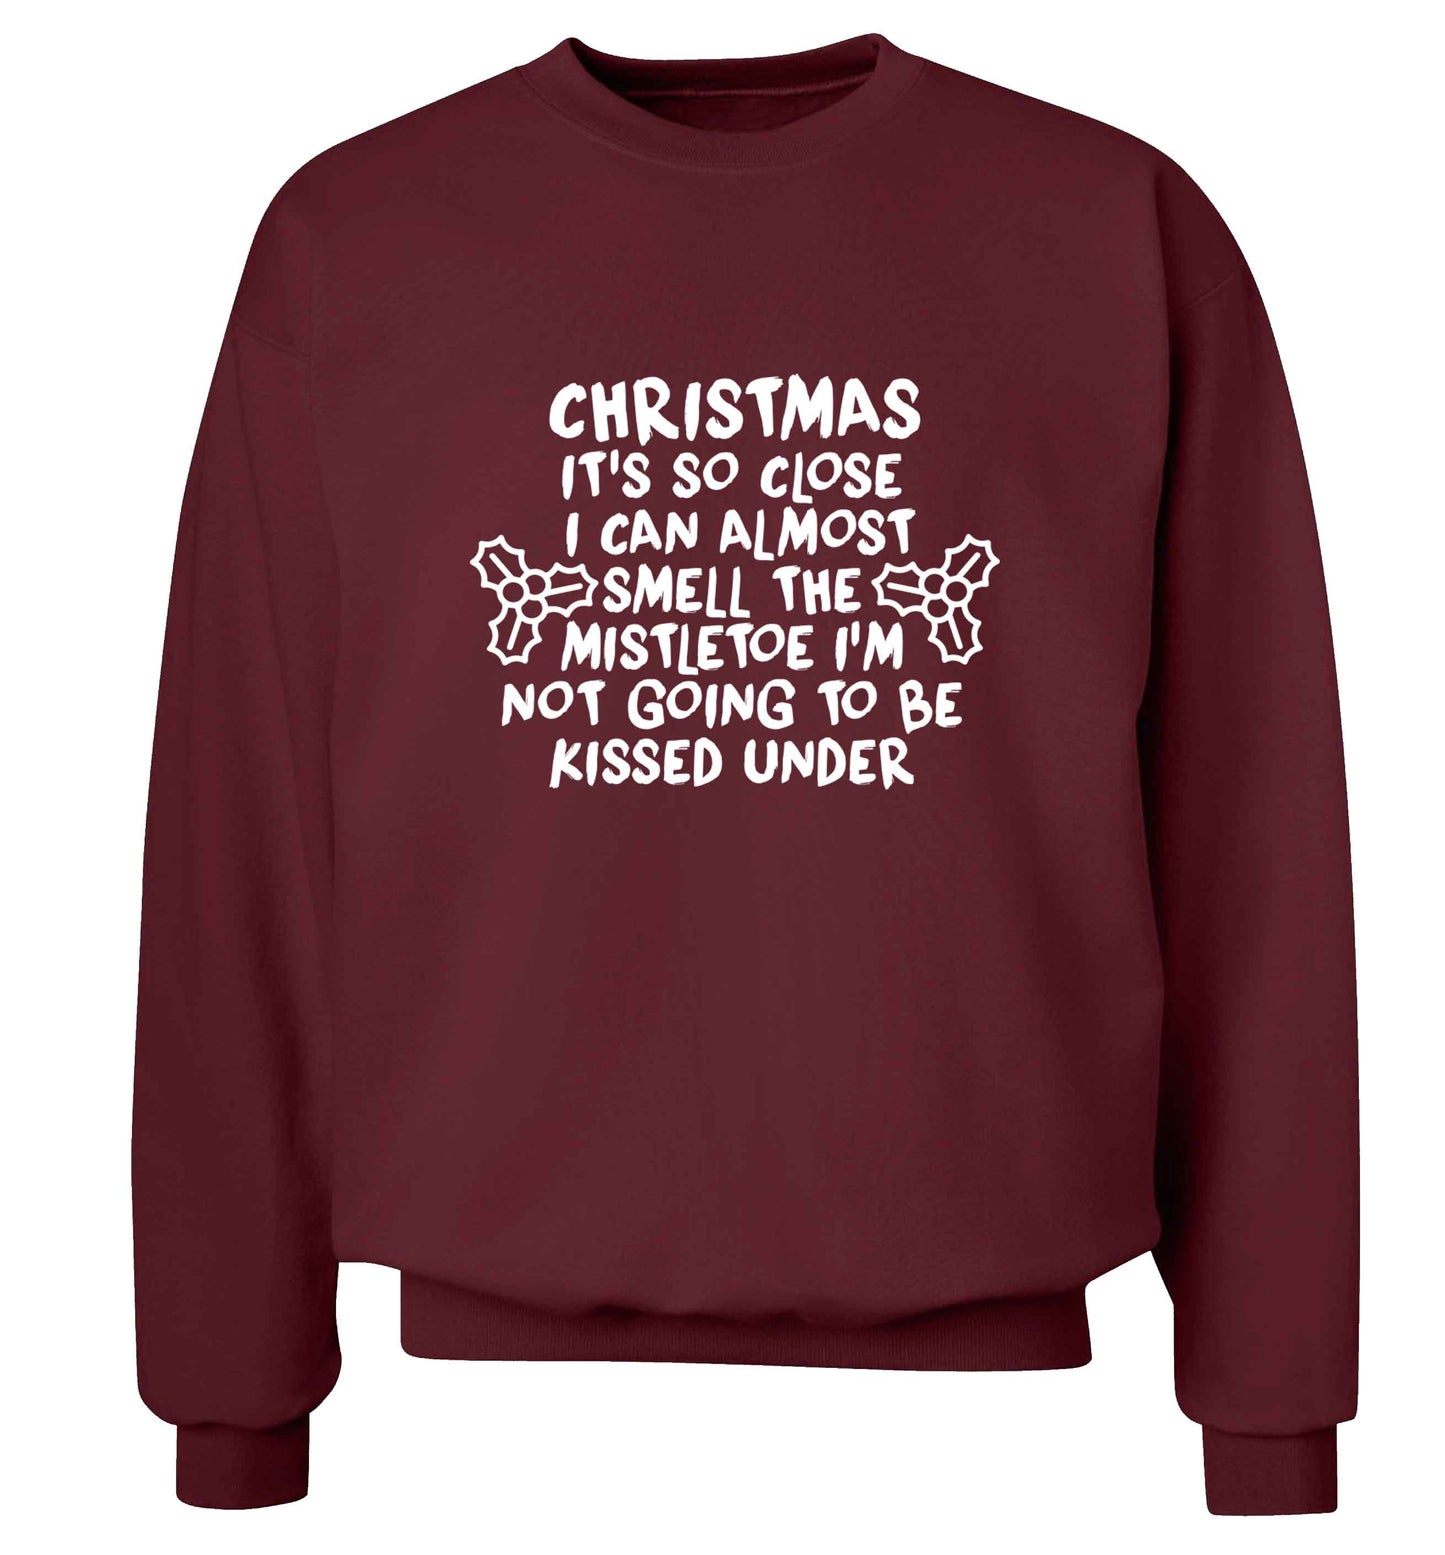 Christmas it's so close I can almost smell the misteltoe I'm not going to be kissed under adult's unisex maroon sweater 2XL